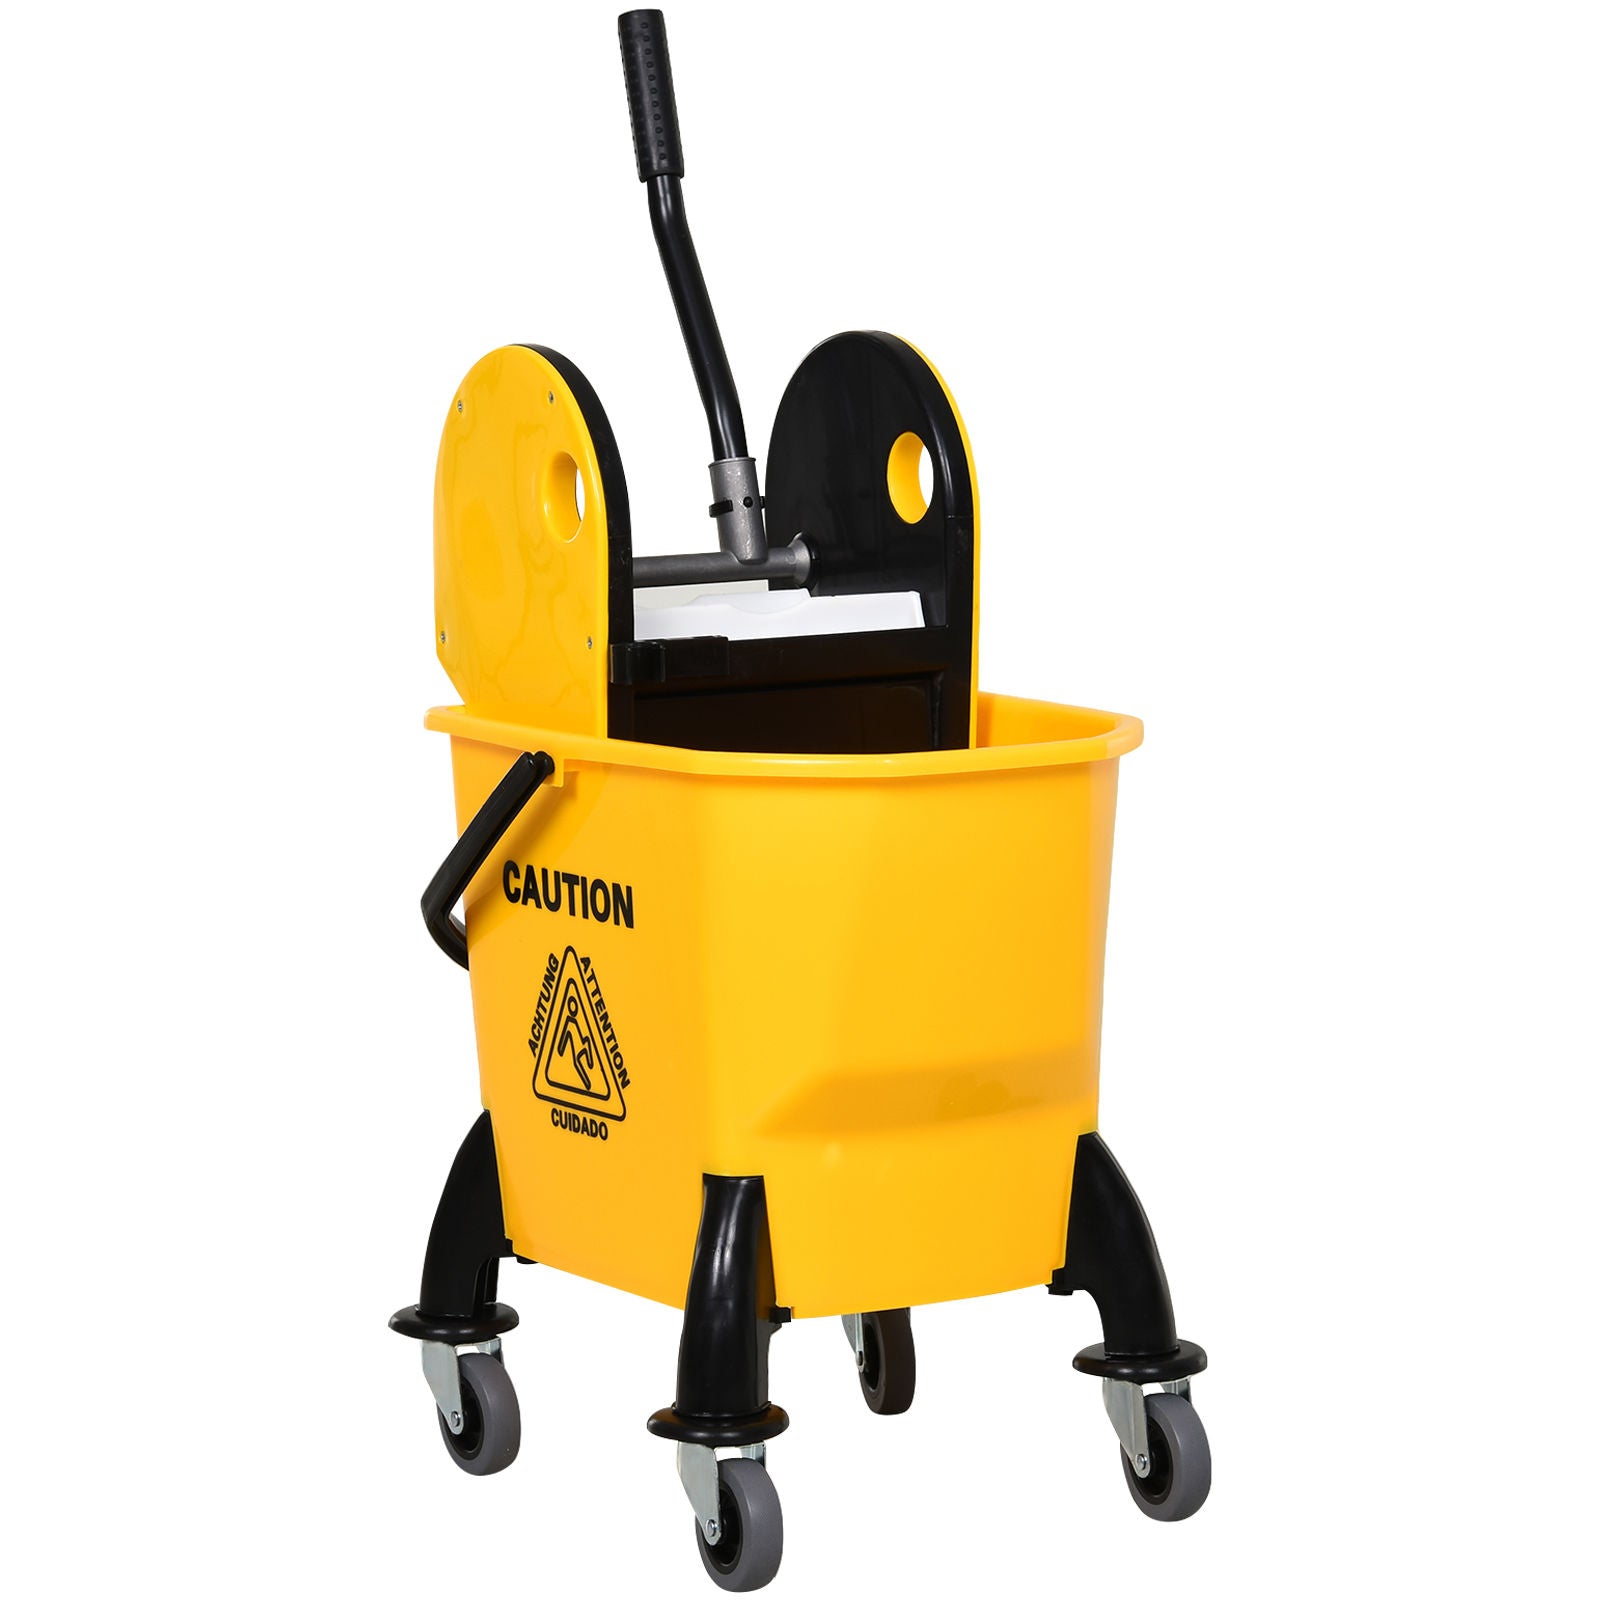 Nancy's Azilda Cleaning trolley - Cleaning trolley with wringer 26 liters